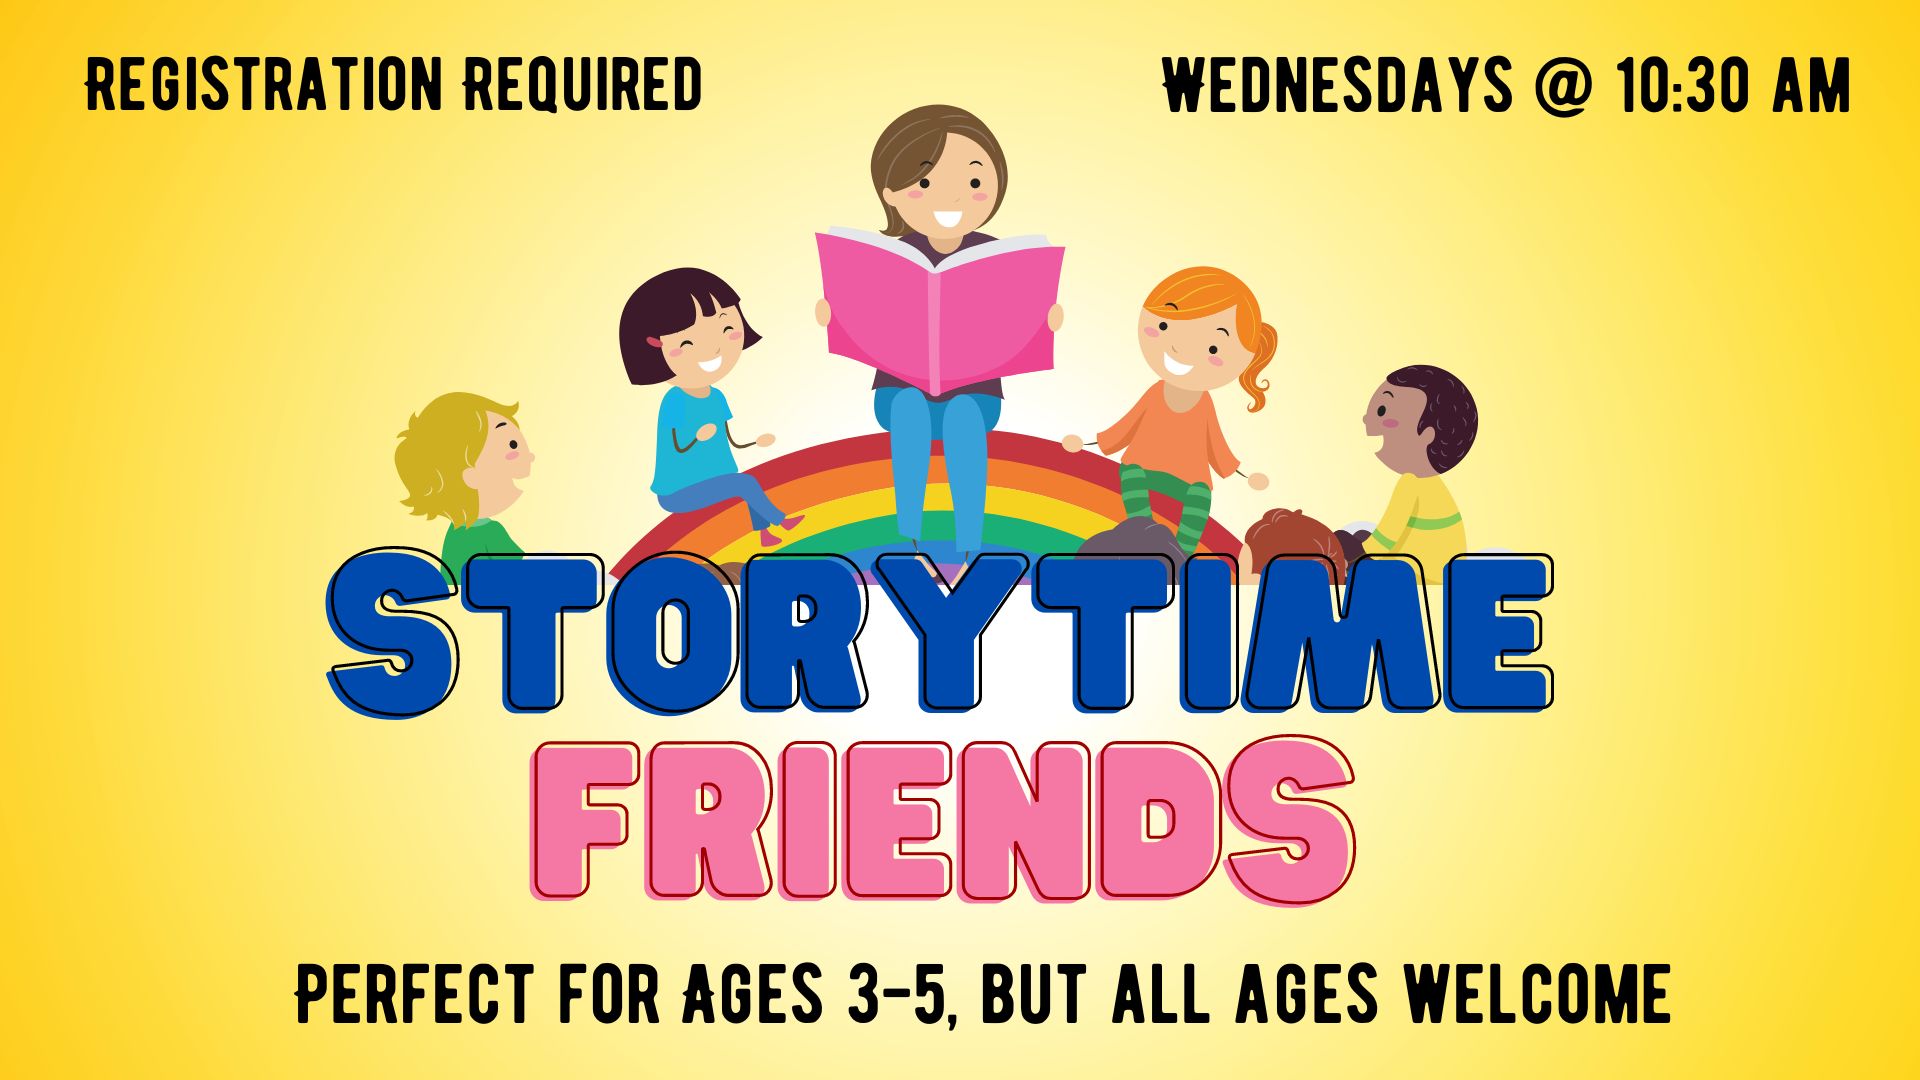 Picture graphic of a smiling storyteller sitting on a rainbow holding a book, surrounded by several smiling children.  Below the picture is the title "Storytime Friends".   Additional text reads "Registration Required",  "Wednesdays at 10:30 am", and "Perfect for Ages 3-5, but all ages welcome".